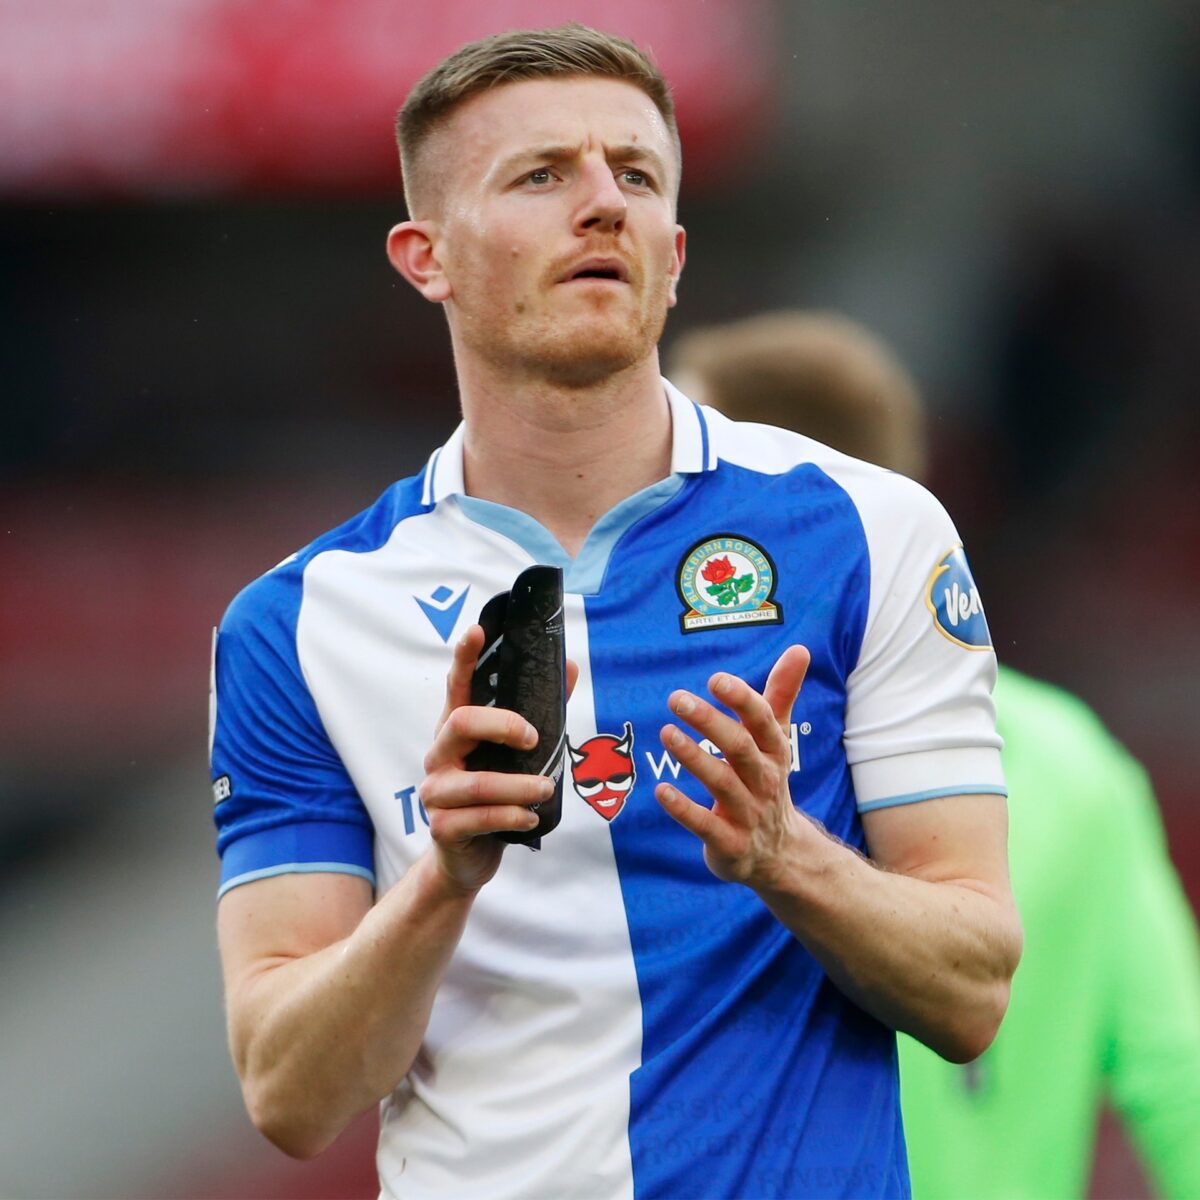 Scott Wharton wearing Blackburn Rovers shirt sponsored by Totally Wicked vapes. Source: Blackburn Rovers. Rishi Sunak has refused to ban football shirts that feature vape company logos, speaking at Prime Minister's Questions yesterday.